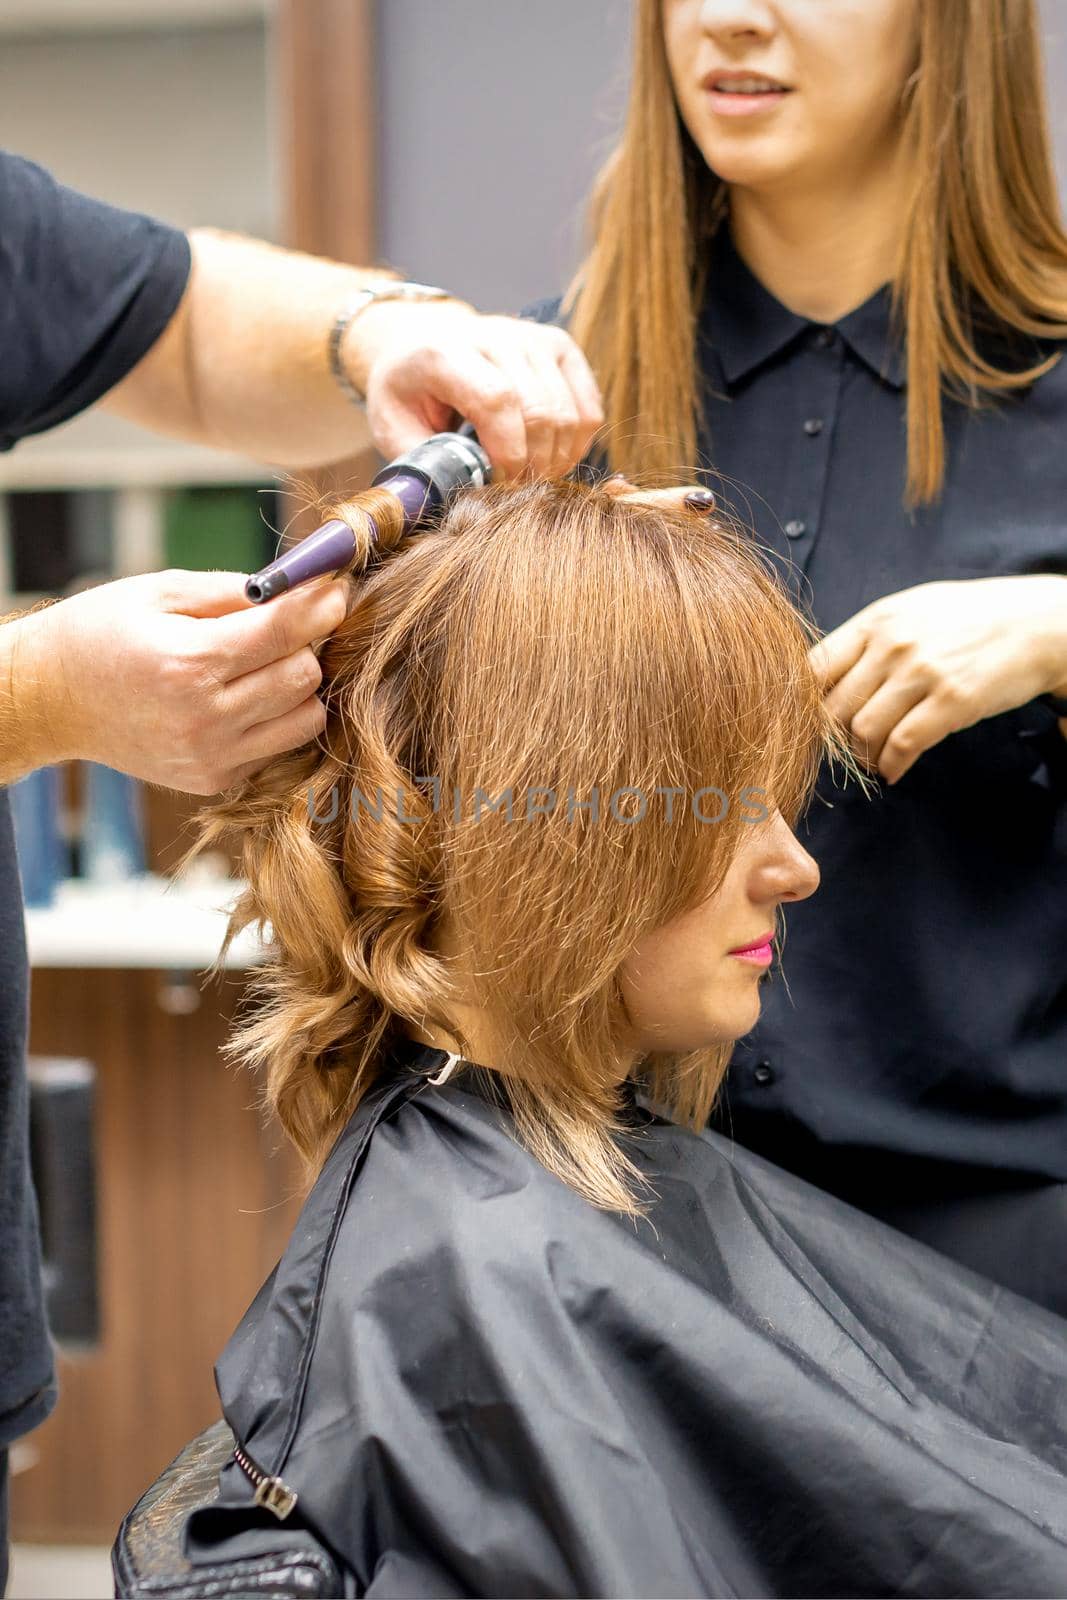 Two hairstylists make curls hairstyle of long brown hair with the curling iron in hairdresser salon